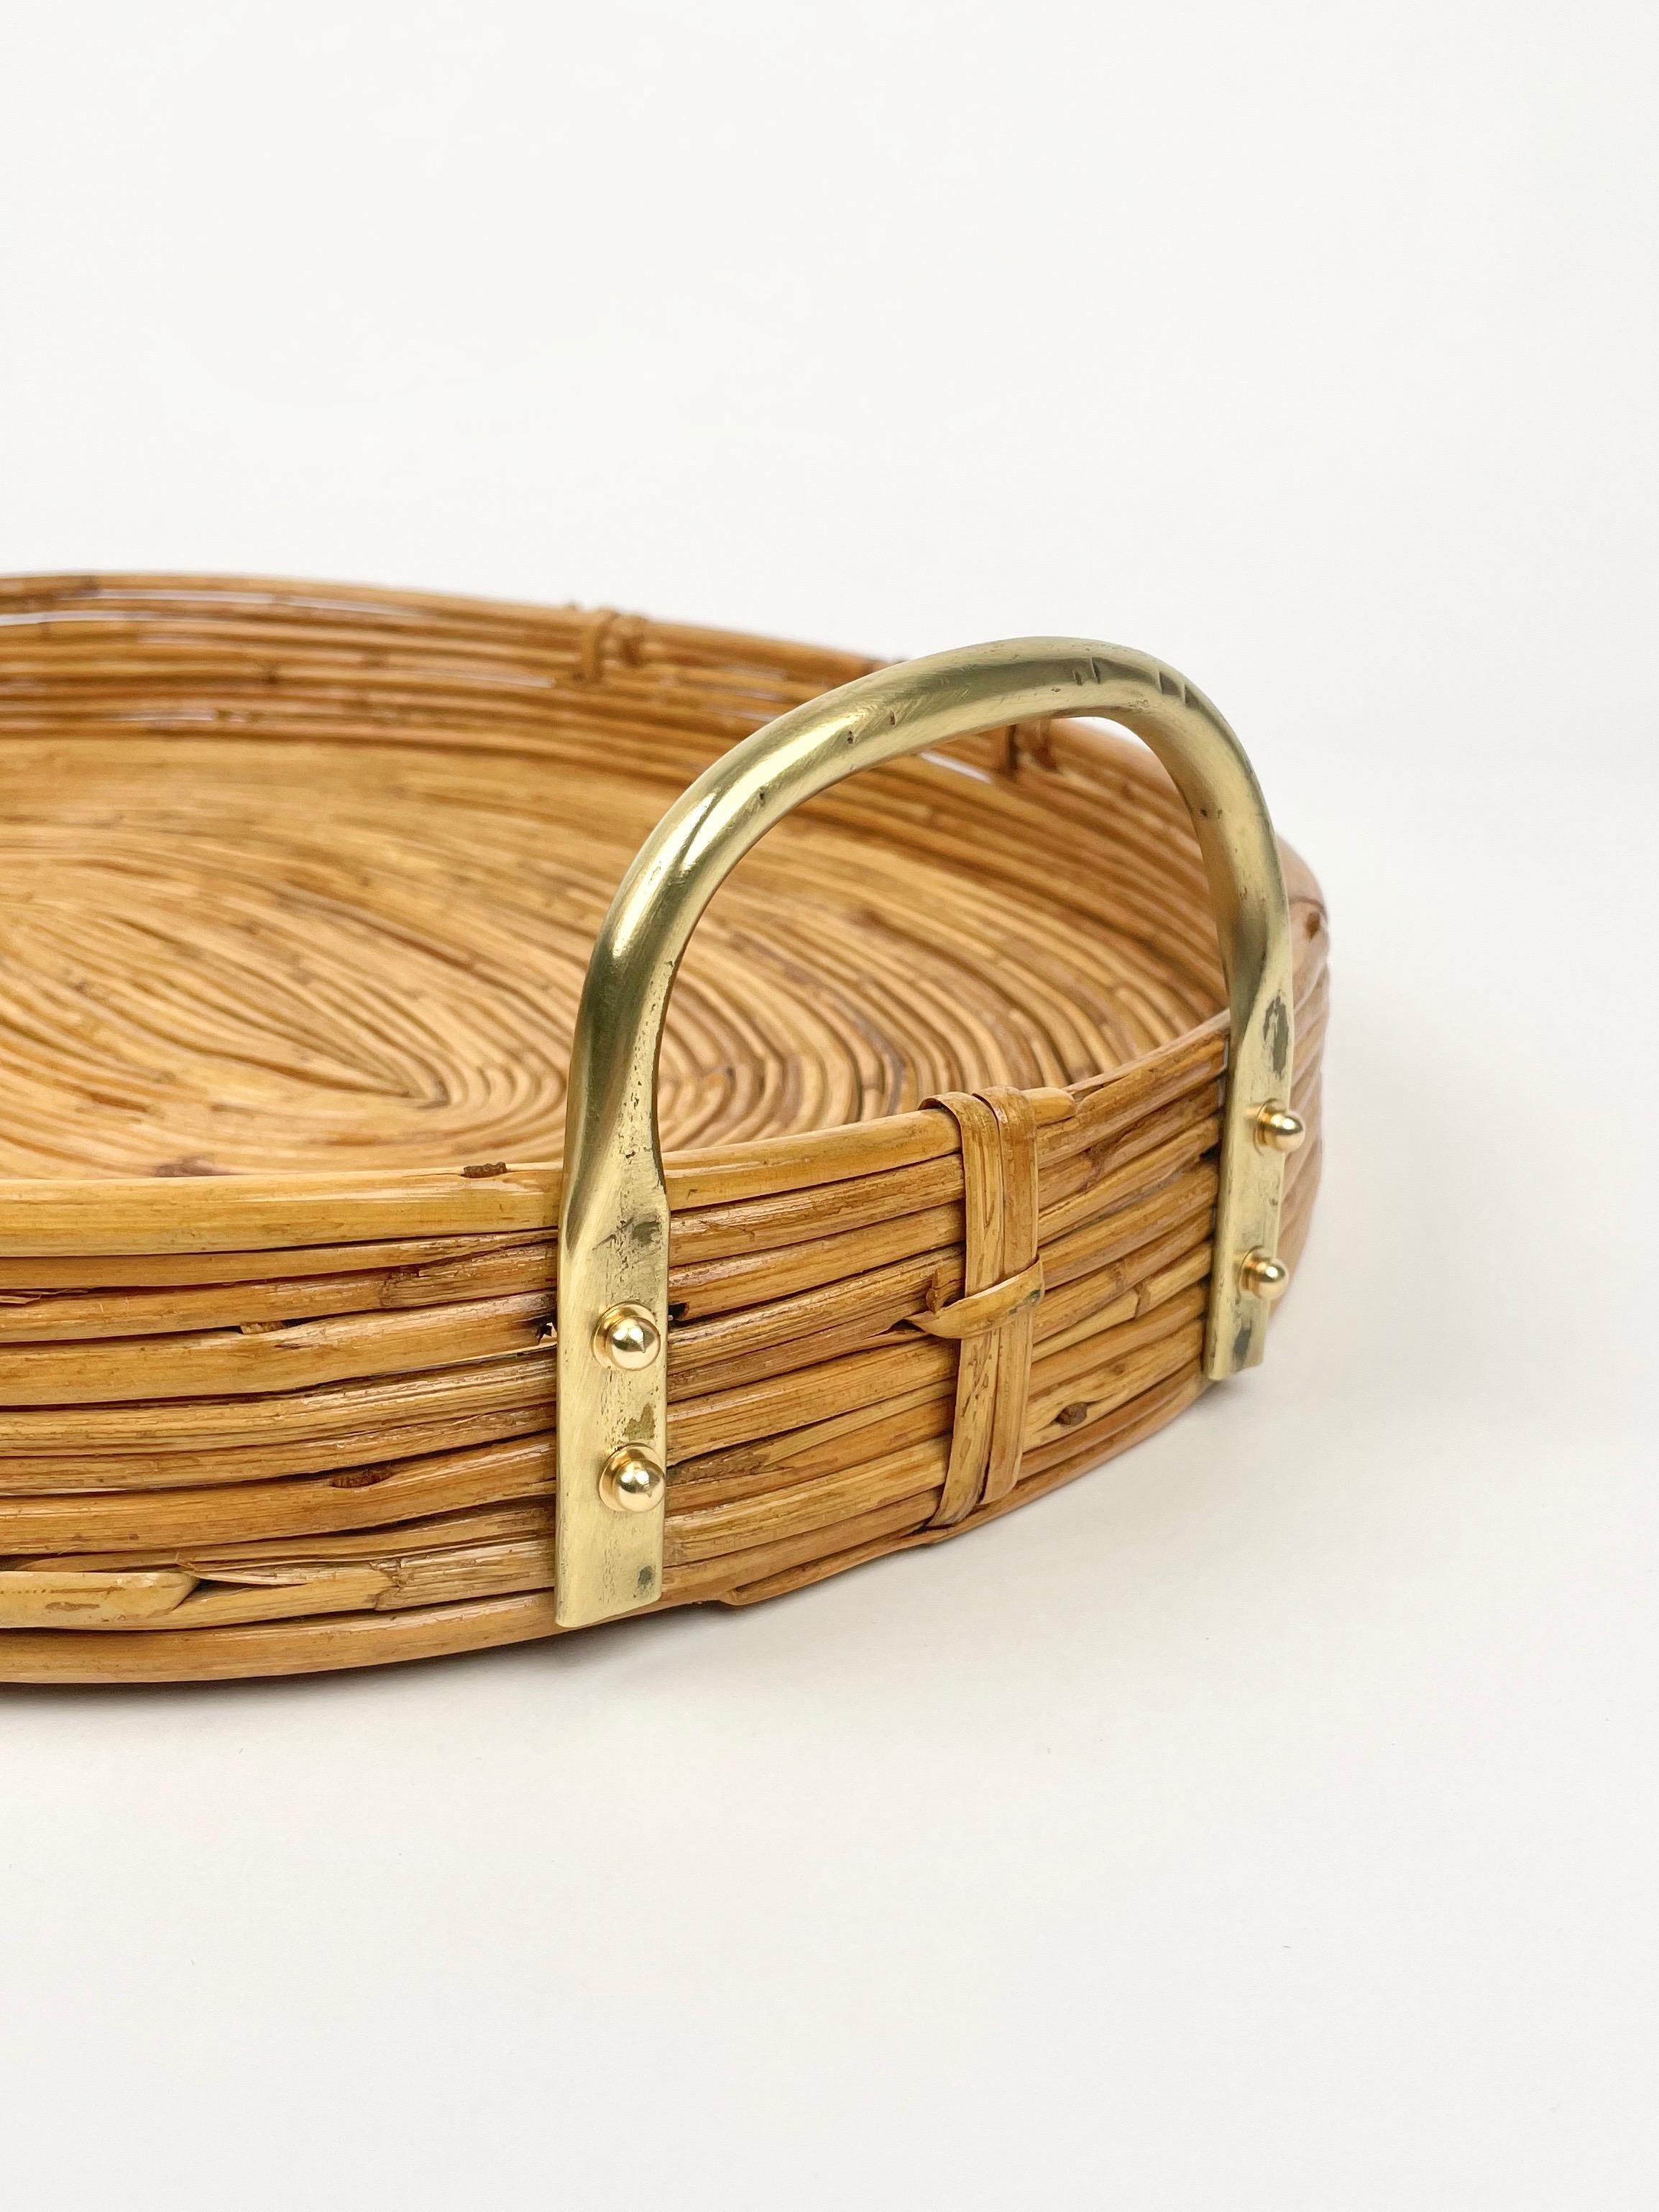 Metal Oval Serving Tray Bamboo, Rattan & Brass, Italy 1970s For Sale